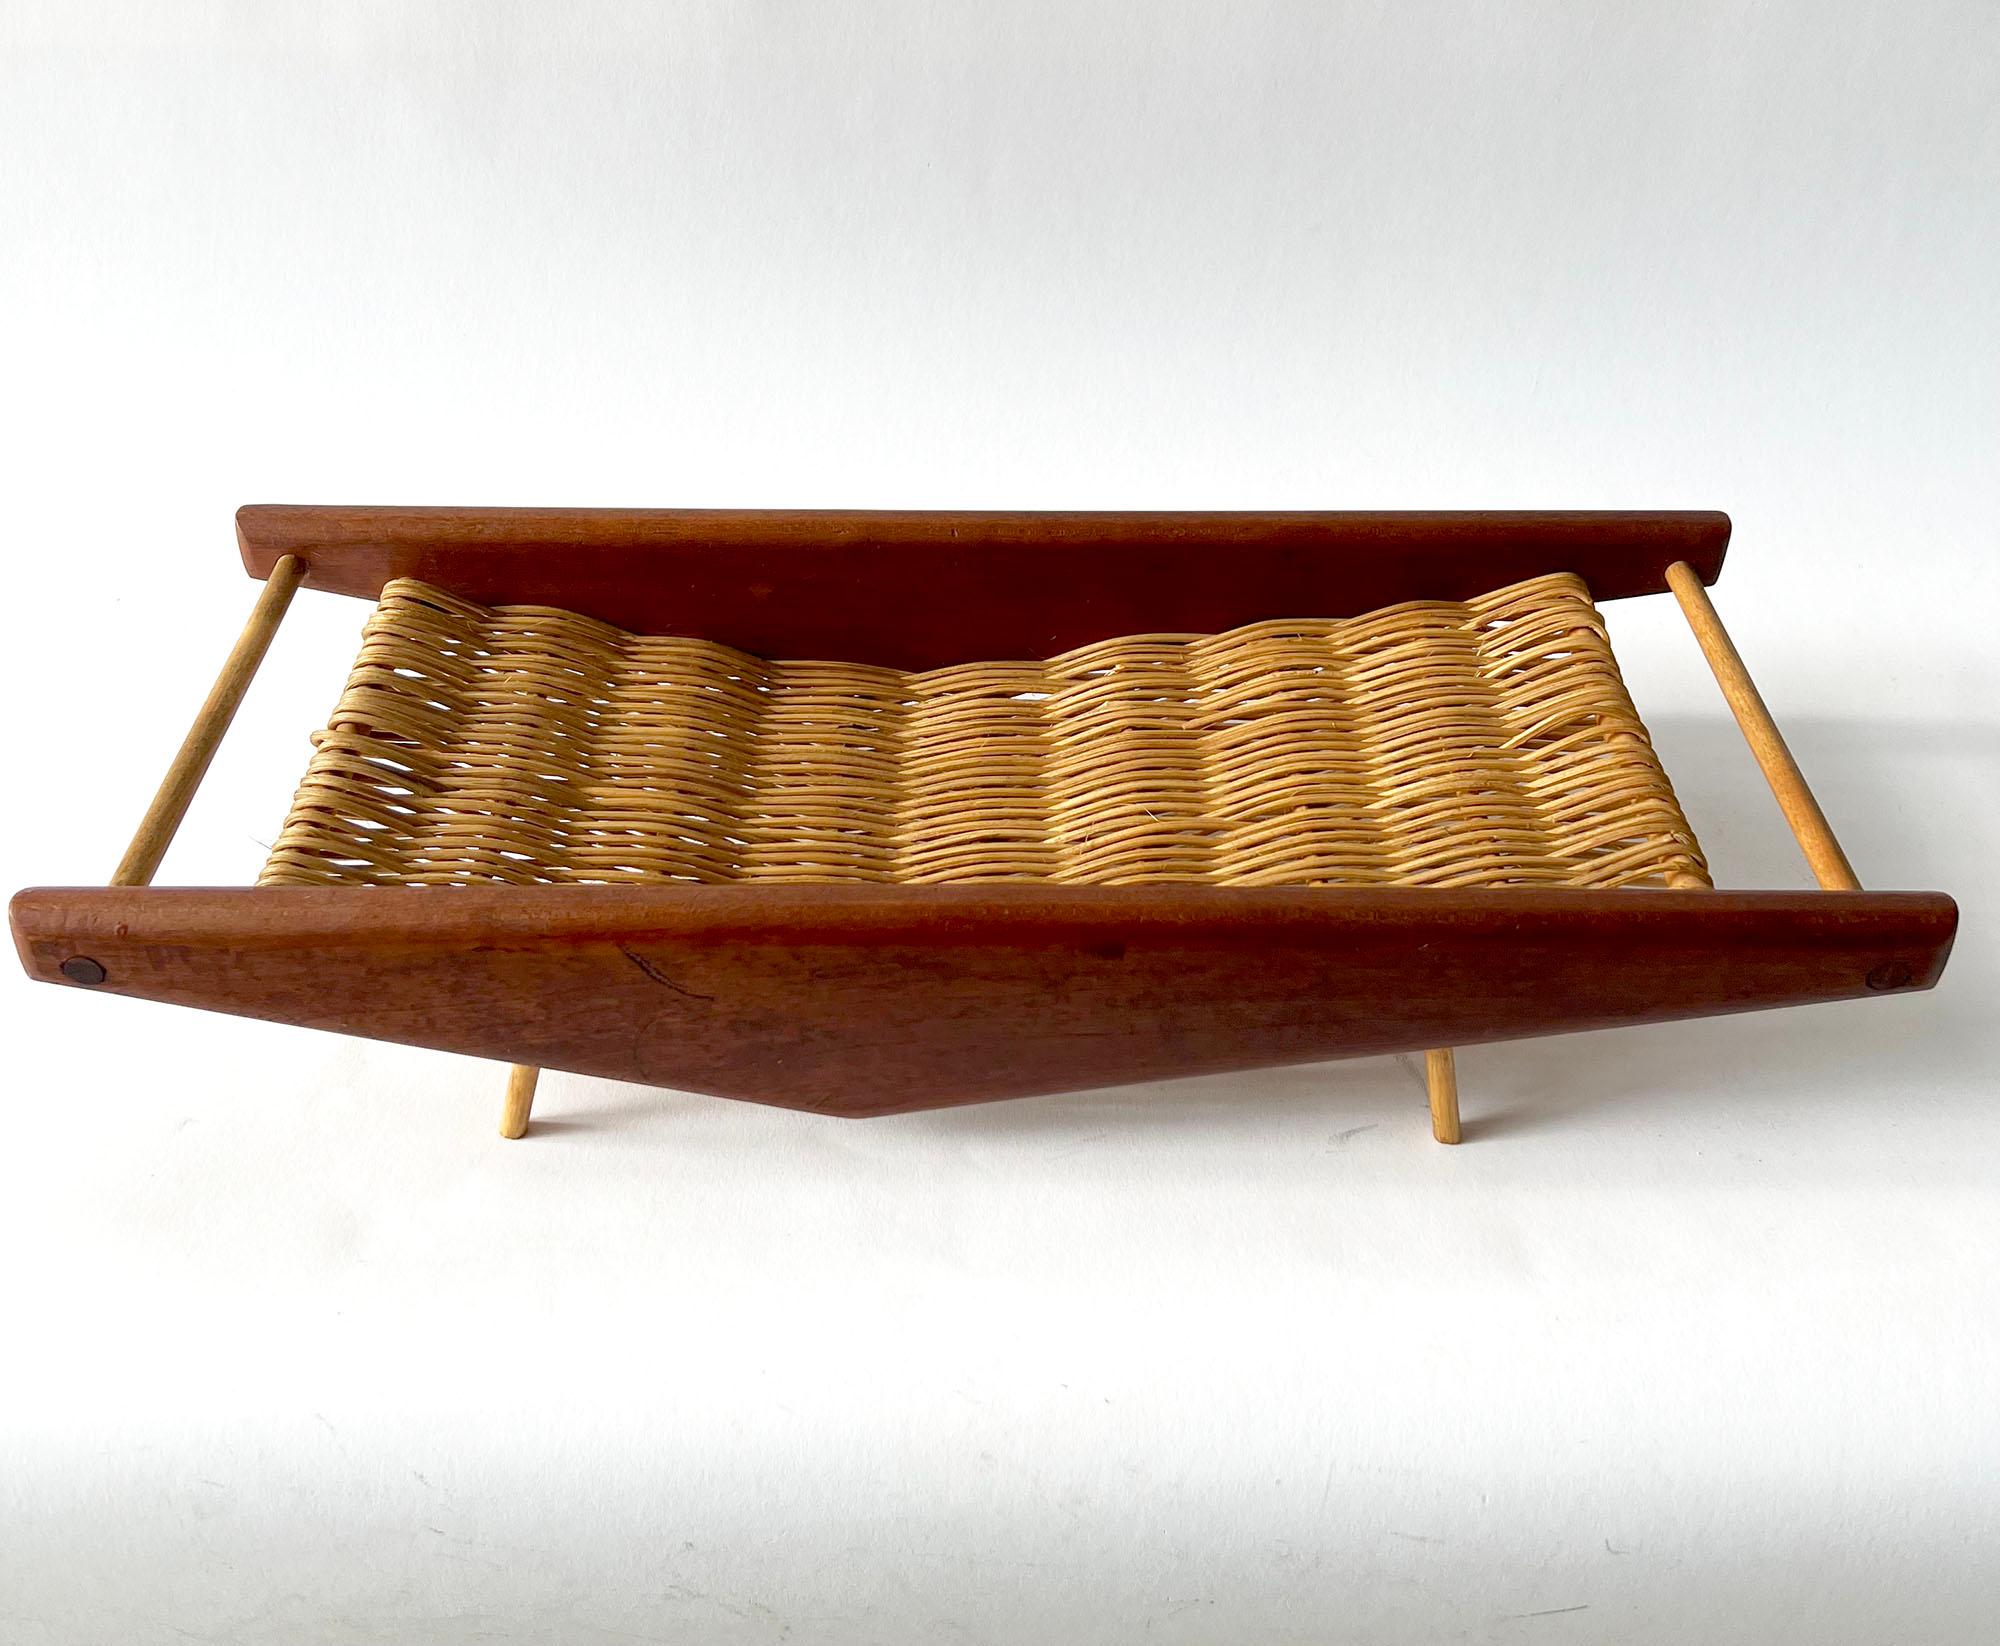 Hand woven rattan and teak wood basket, possibly designed and created by Arthur Umanoff. Piece could hold a few pieces of fruit, bread or stand alone due to its beautifully sculptured design. Basket measures 3.75